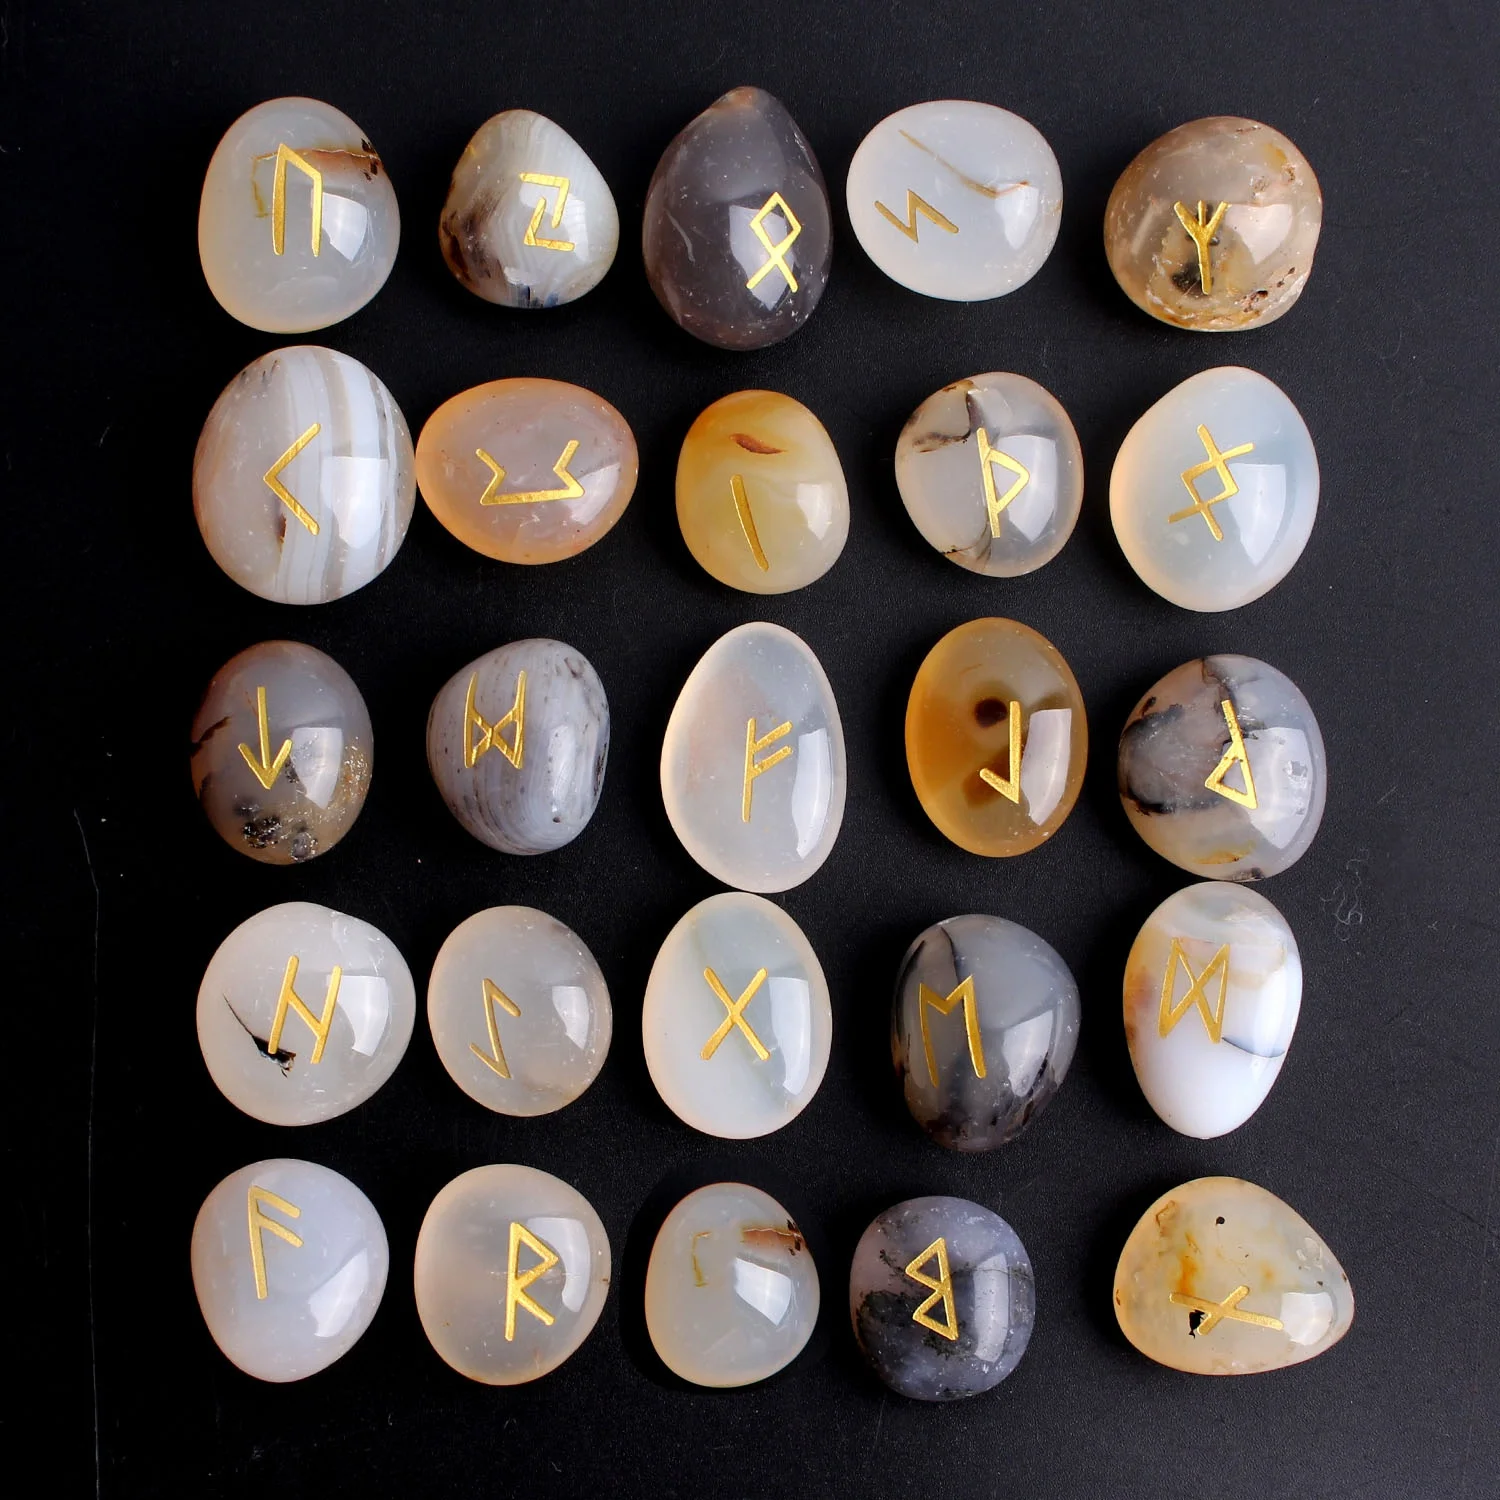 

25Pcs Natural White Aquatic Agate Crystal Rune Divination Runes Stones Fortune-telling Reiki Healing Meditation Gift Collection